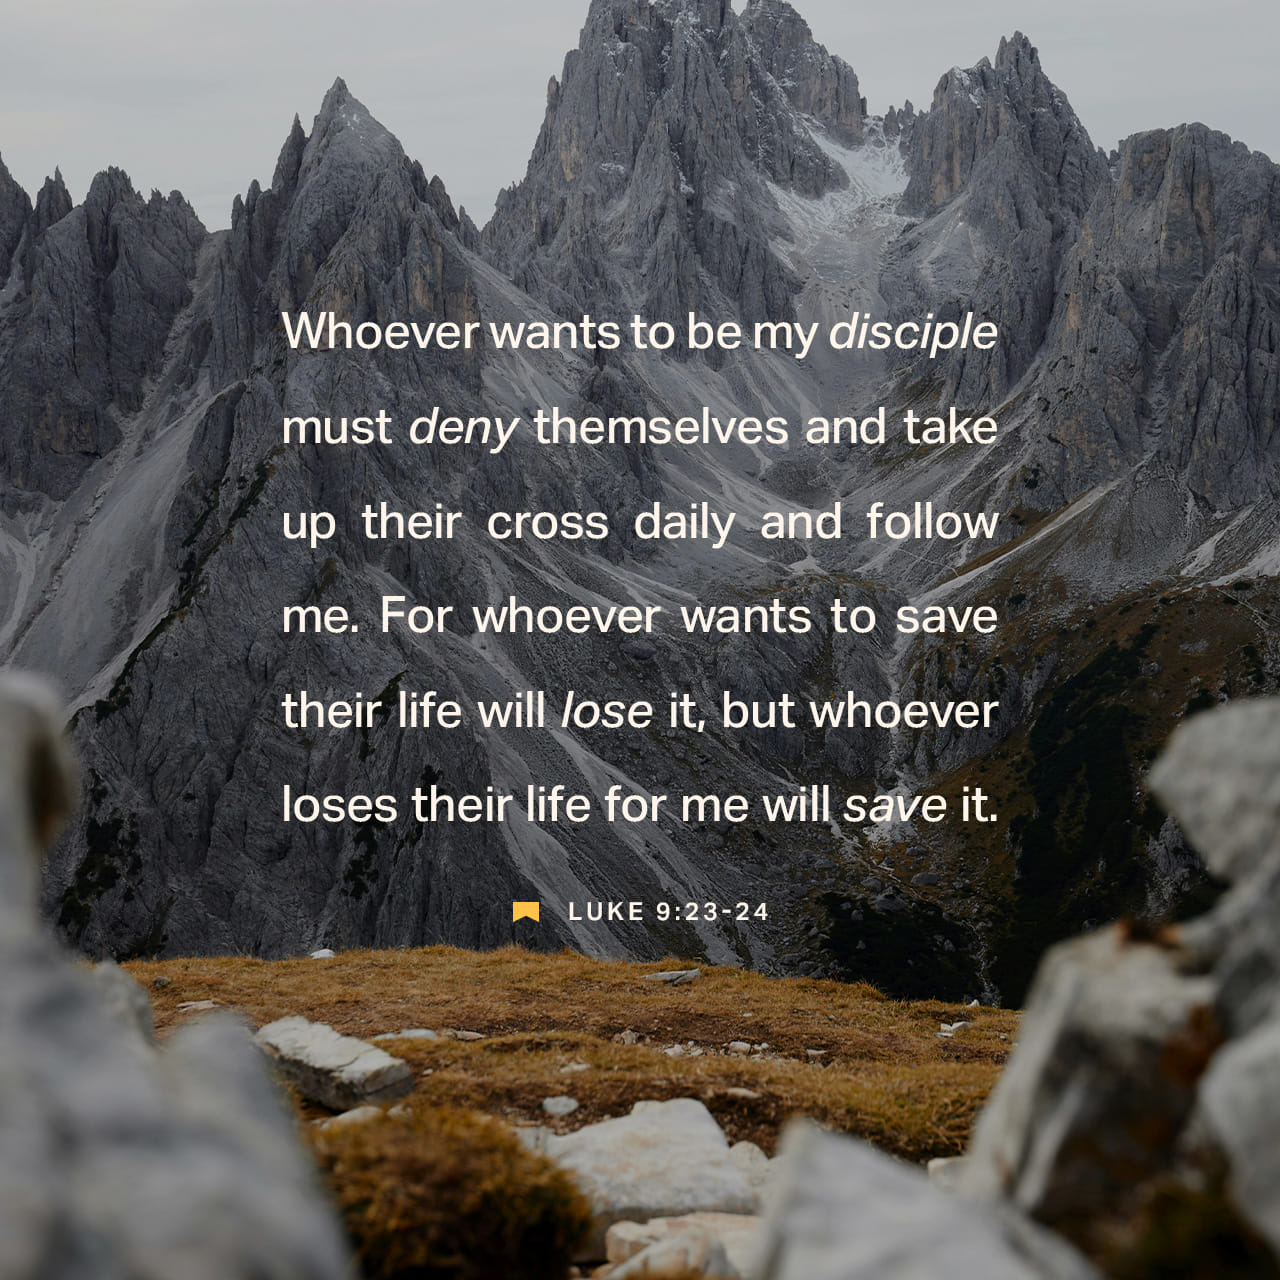 Luke 9:23-24 And he said to them all, If any man will come after me, let him deny himself, and take up his cross daily, and follow me. For whosoever will save his life shall lose it: but whosoever will lose his li | King James Version (KJV) | Download The